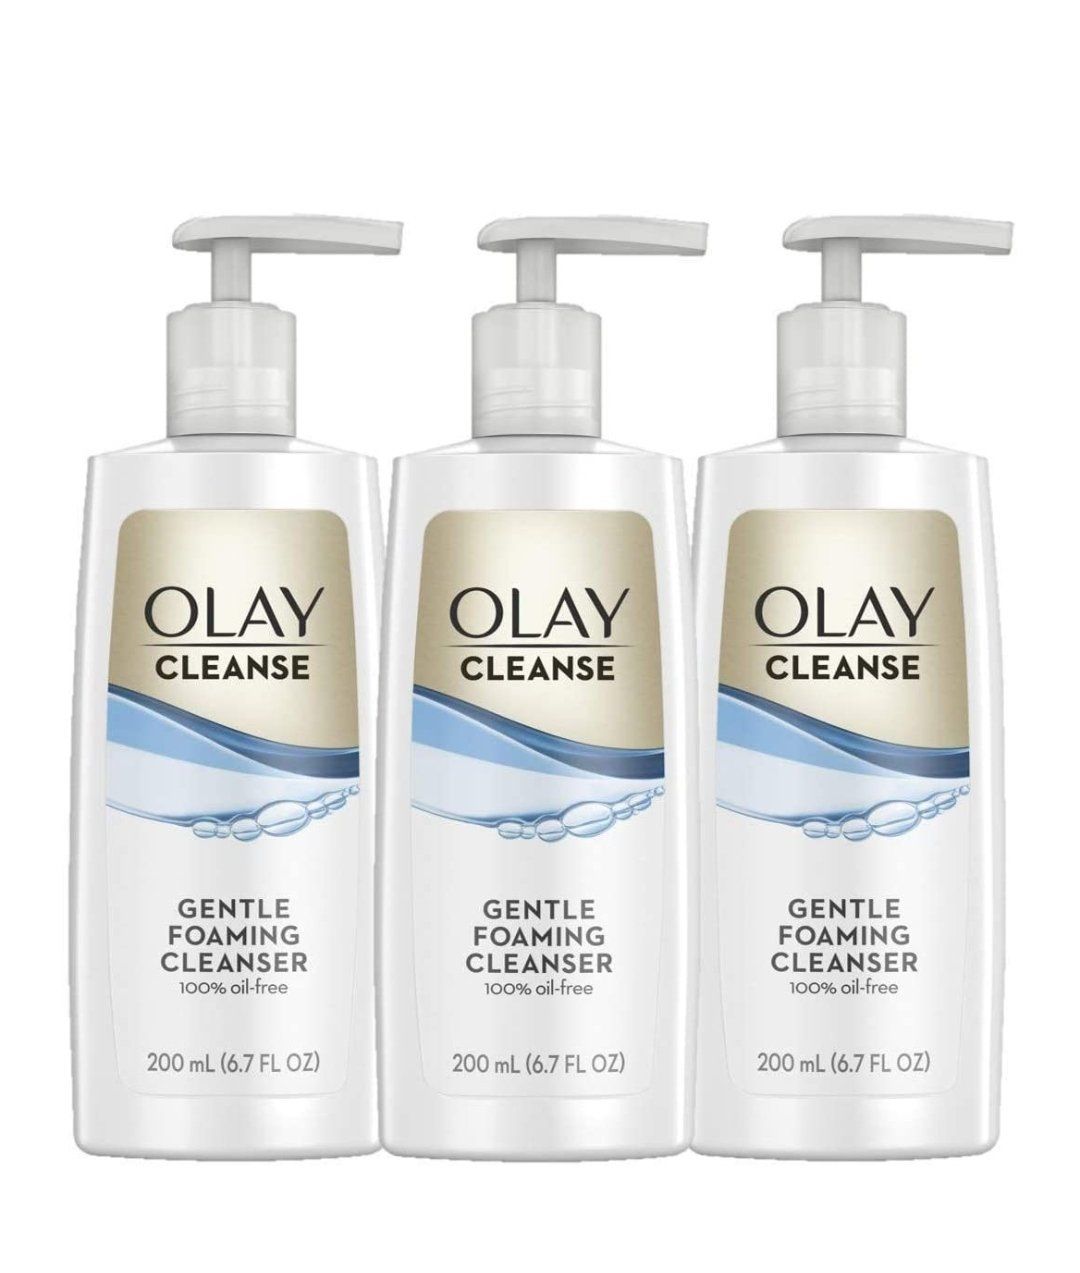 Olay - Gentle Clean Foaming Cleanser with pumps 200ml